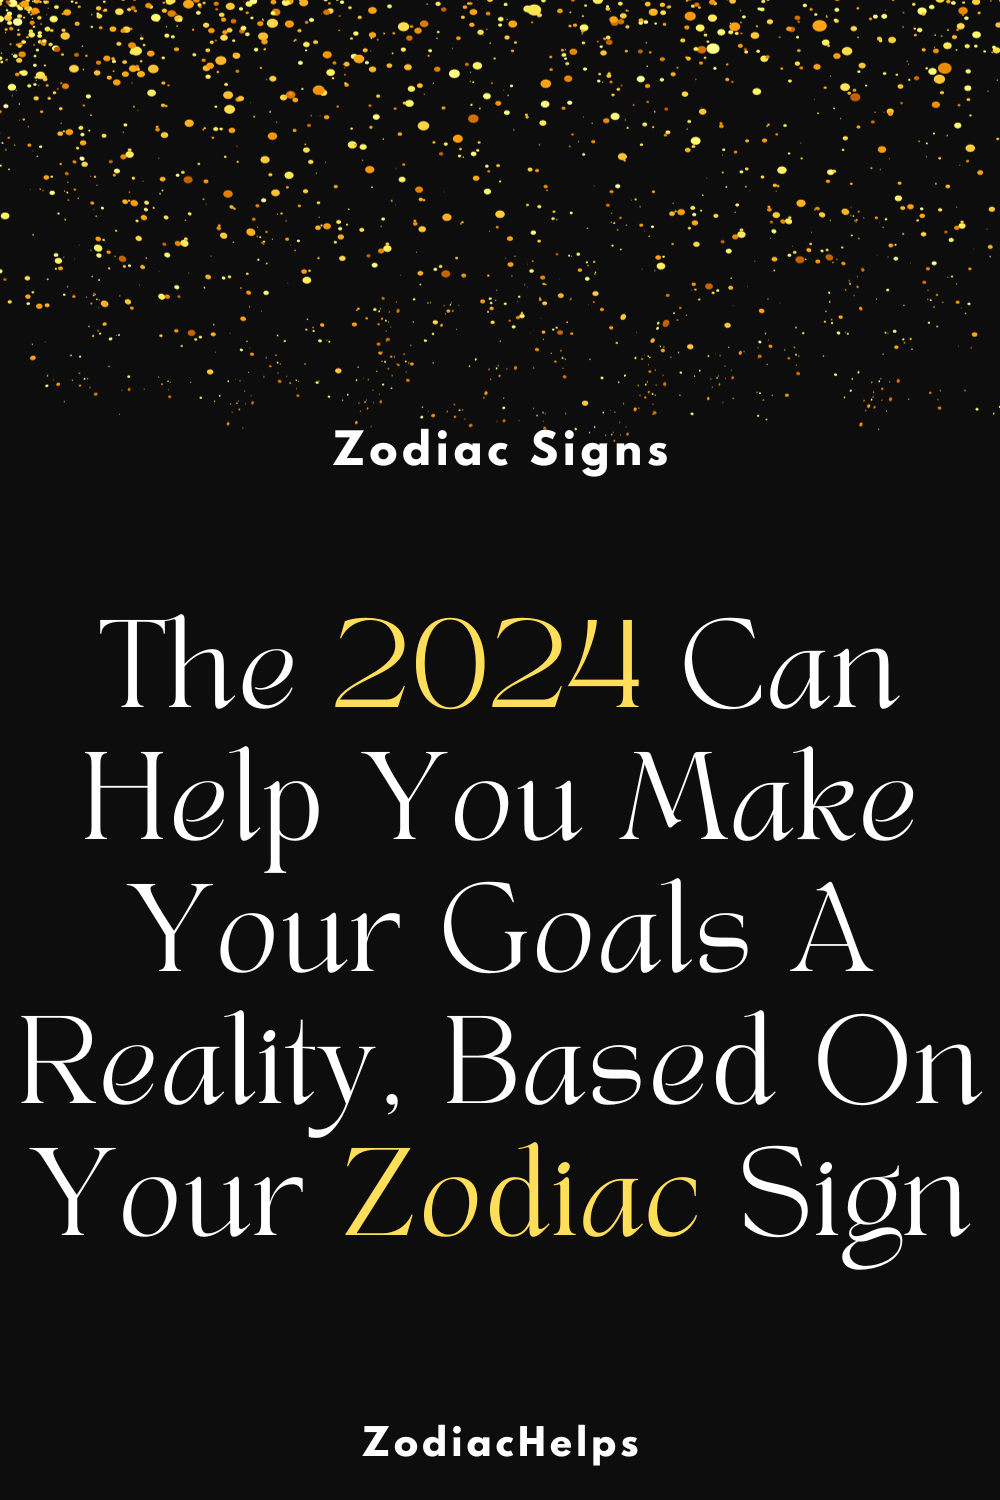 The 2024 Can Help You Make Your Goals A Reality, Based On Your Zodiac Sign